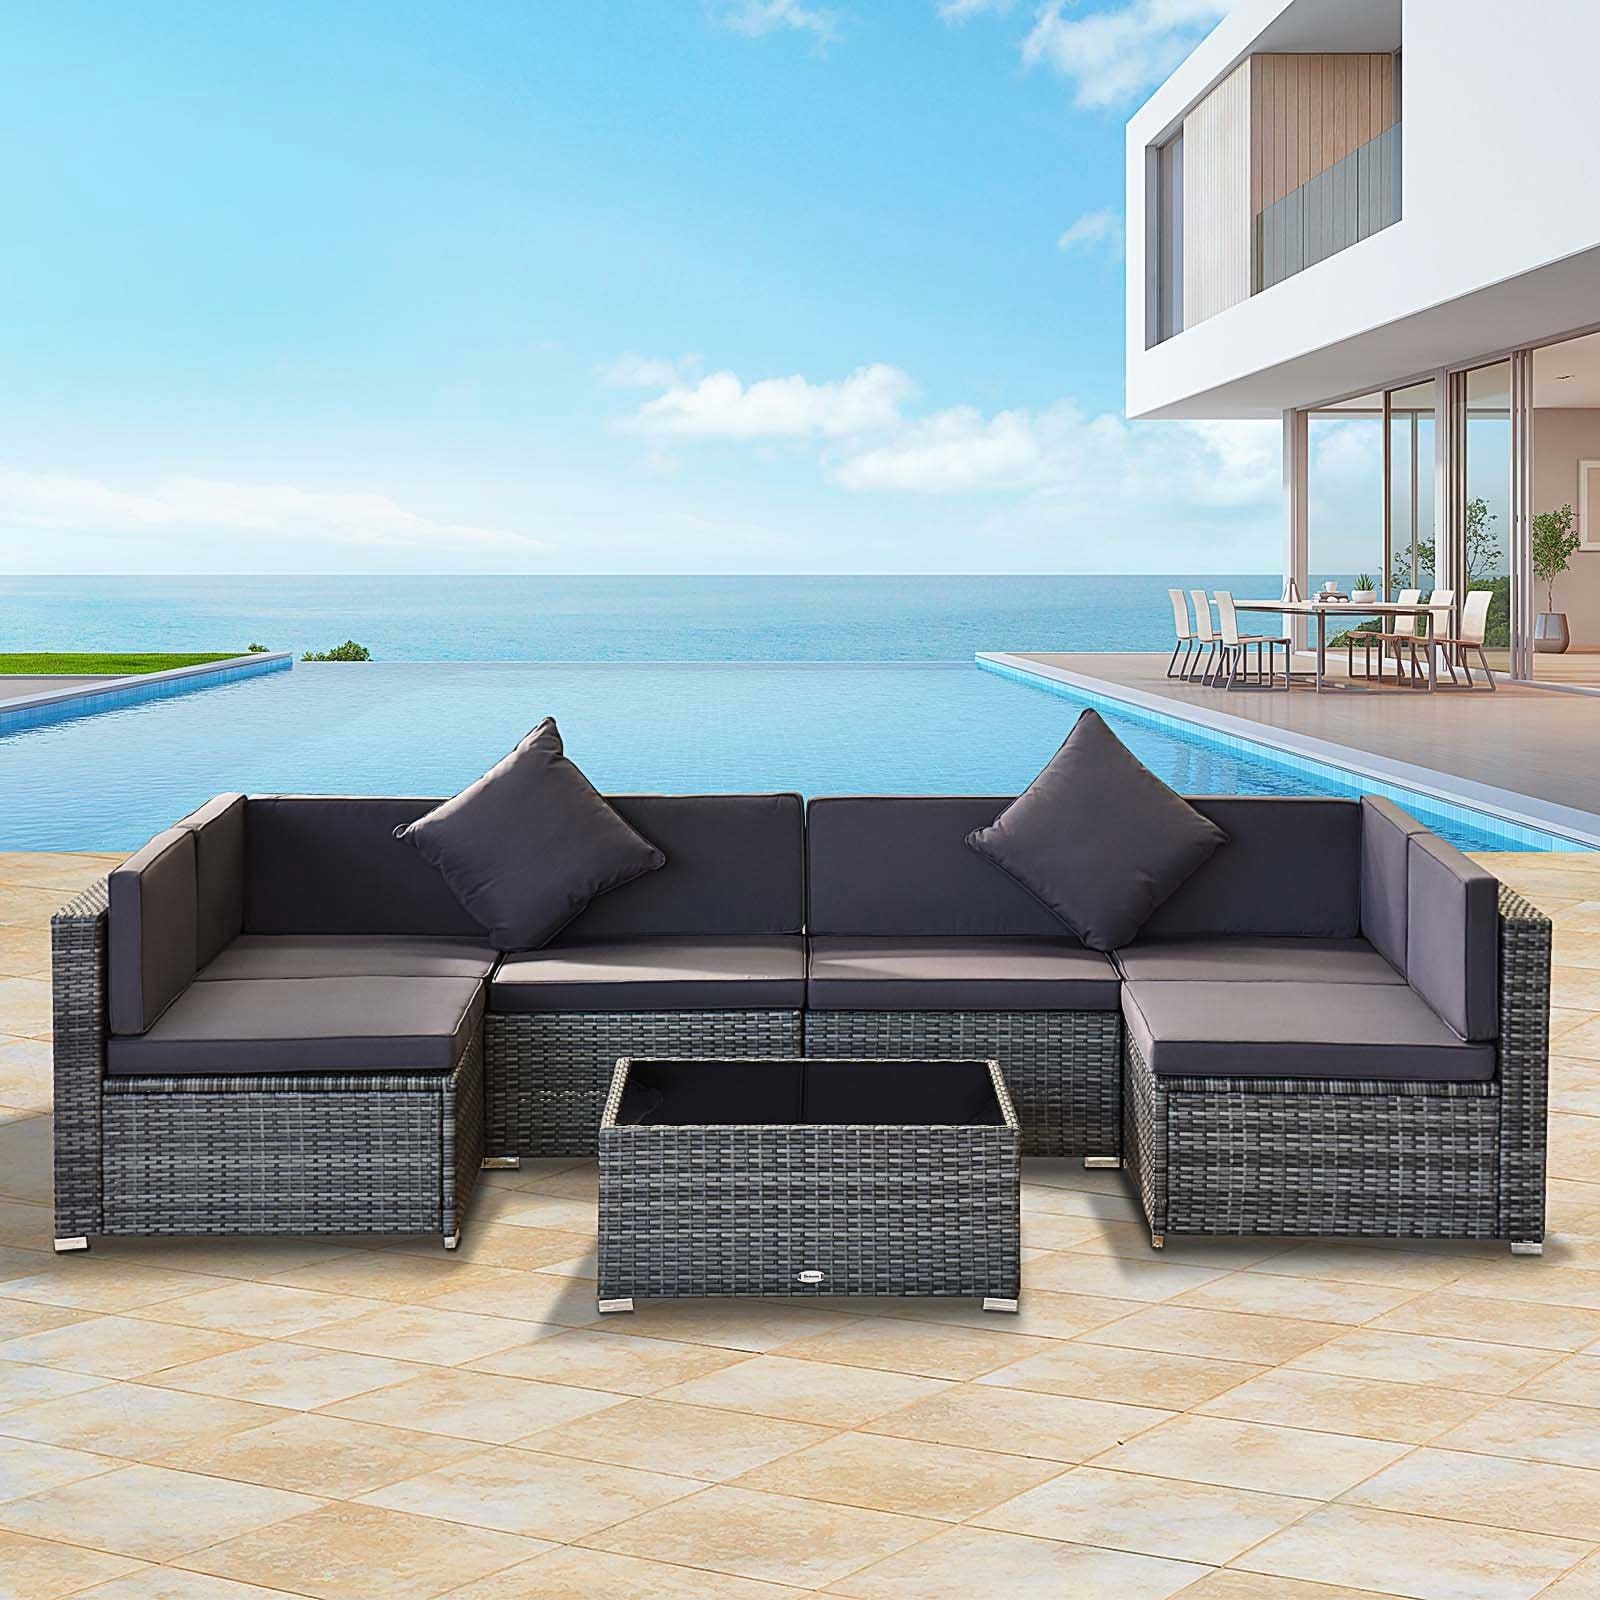 Siara 7 Piece Rattan Wicker Sectional Patio Sethavenside Home – On Sale  – – 27619016 Within Patio Rattan Wicker Furniture (View 9 of 15)